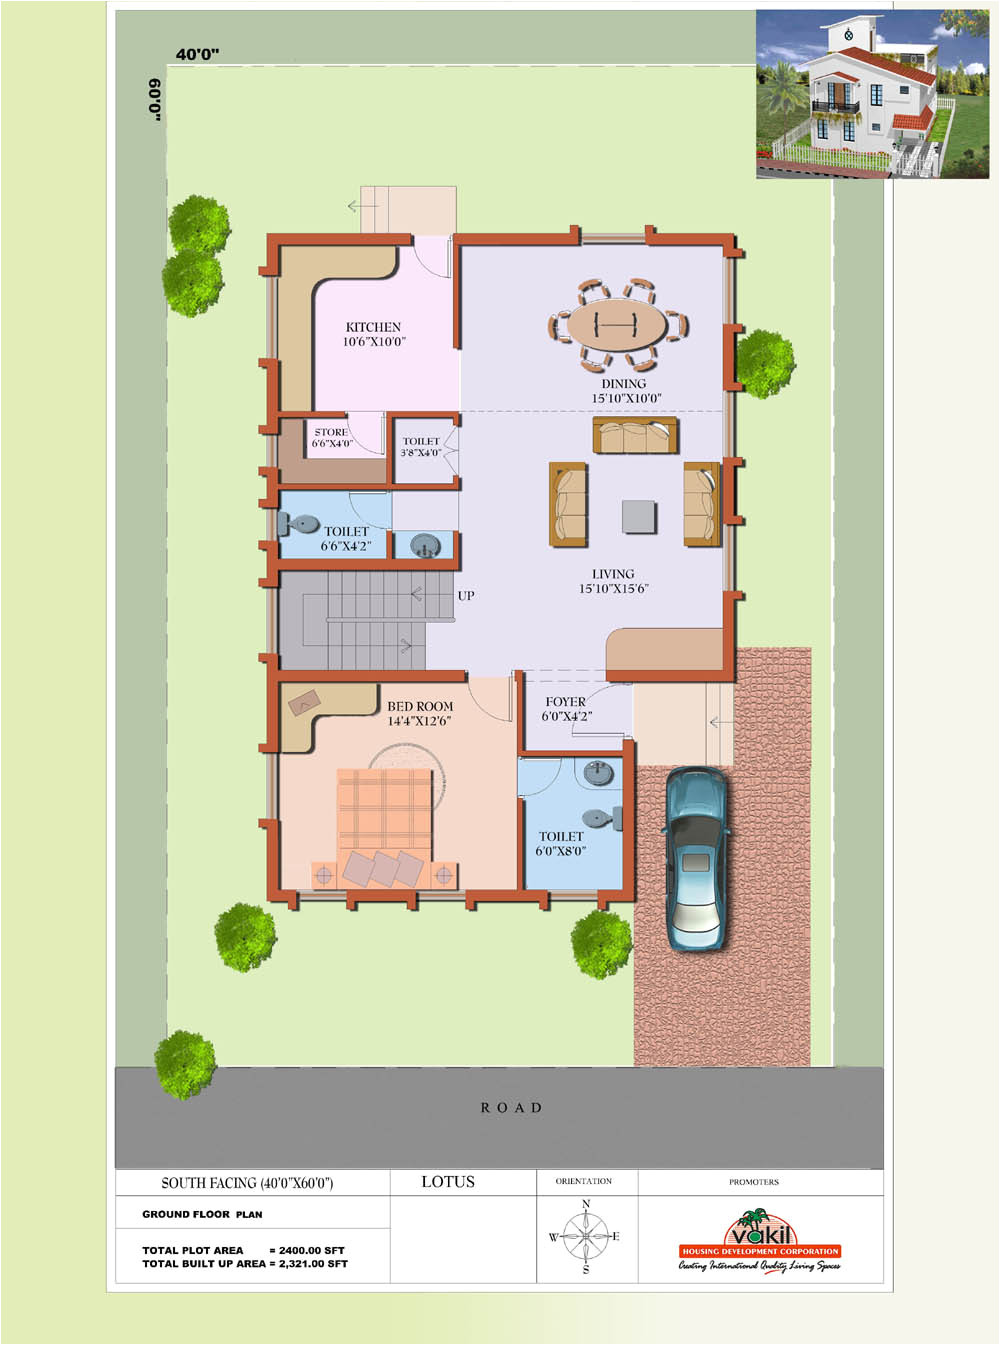 south facing house floor plans